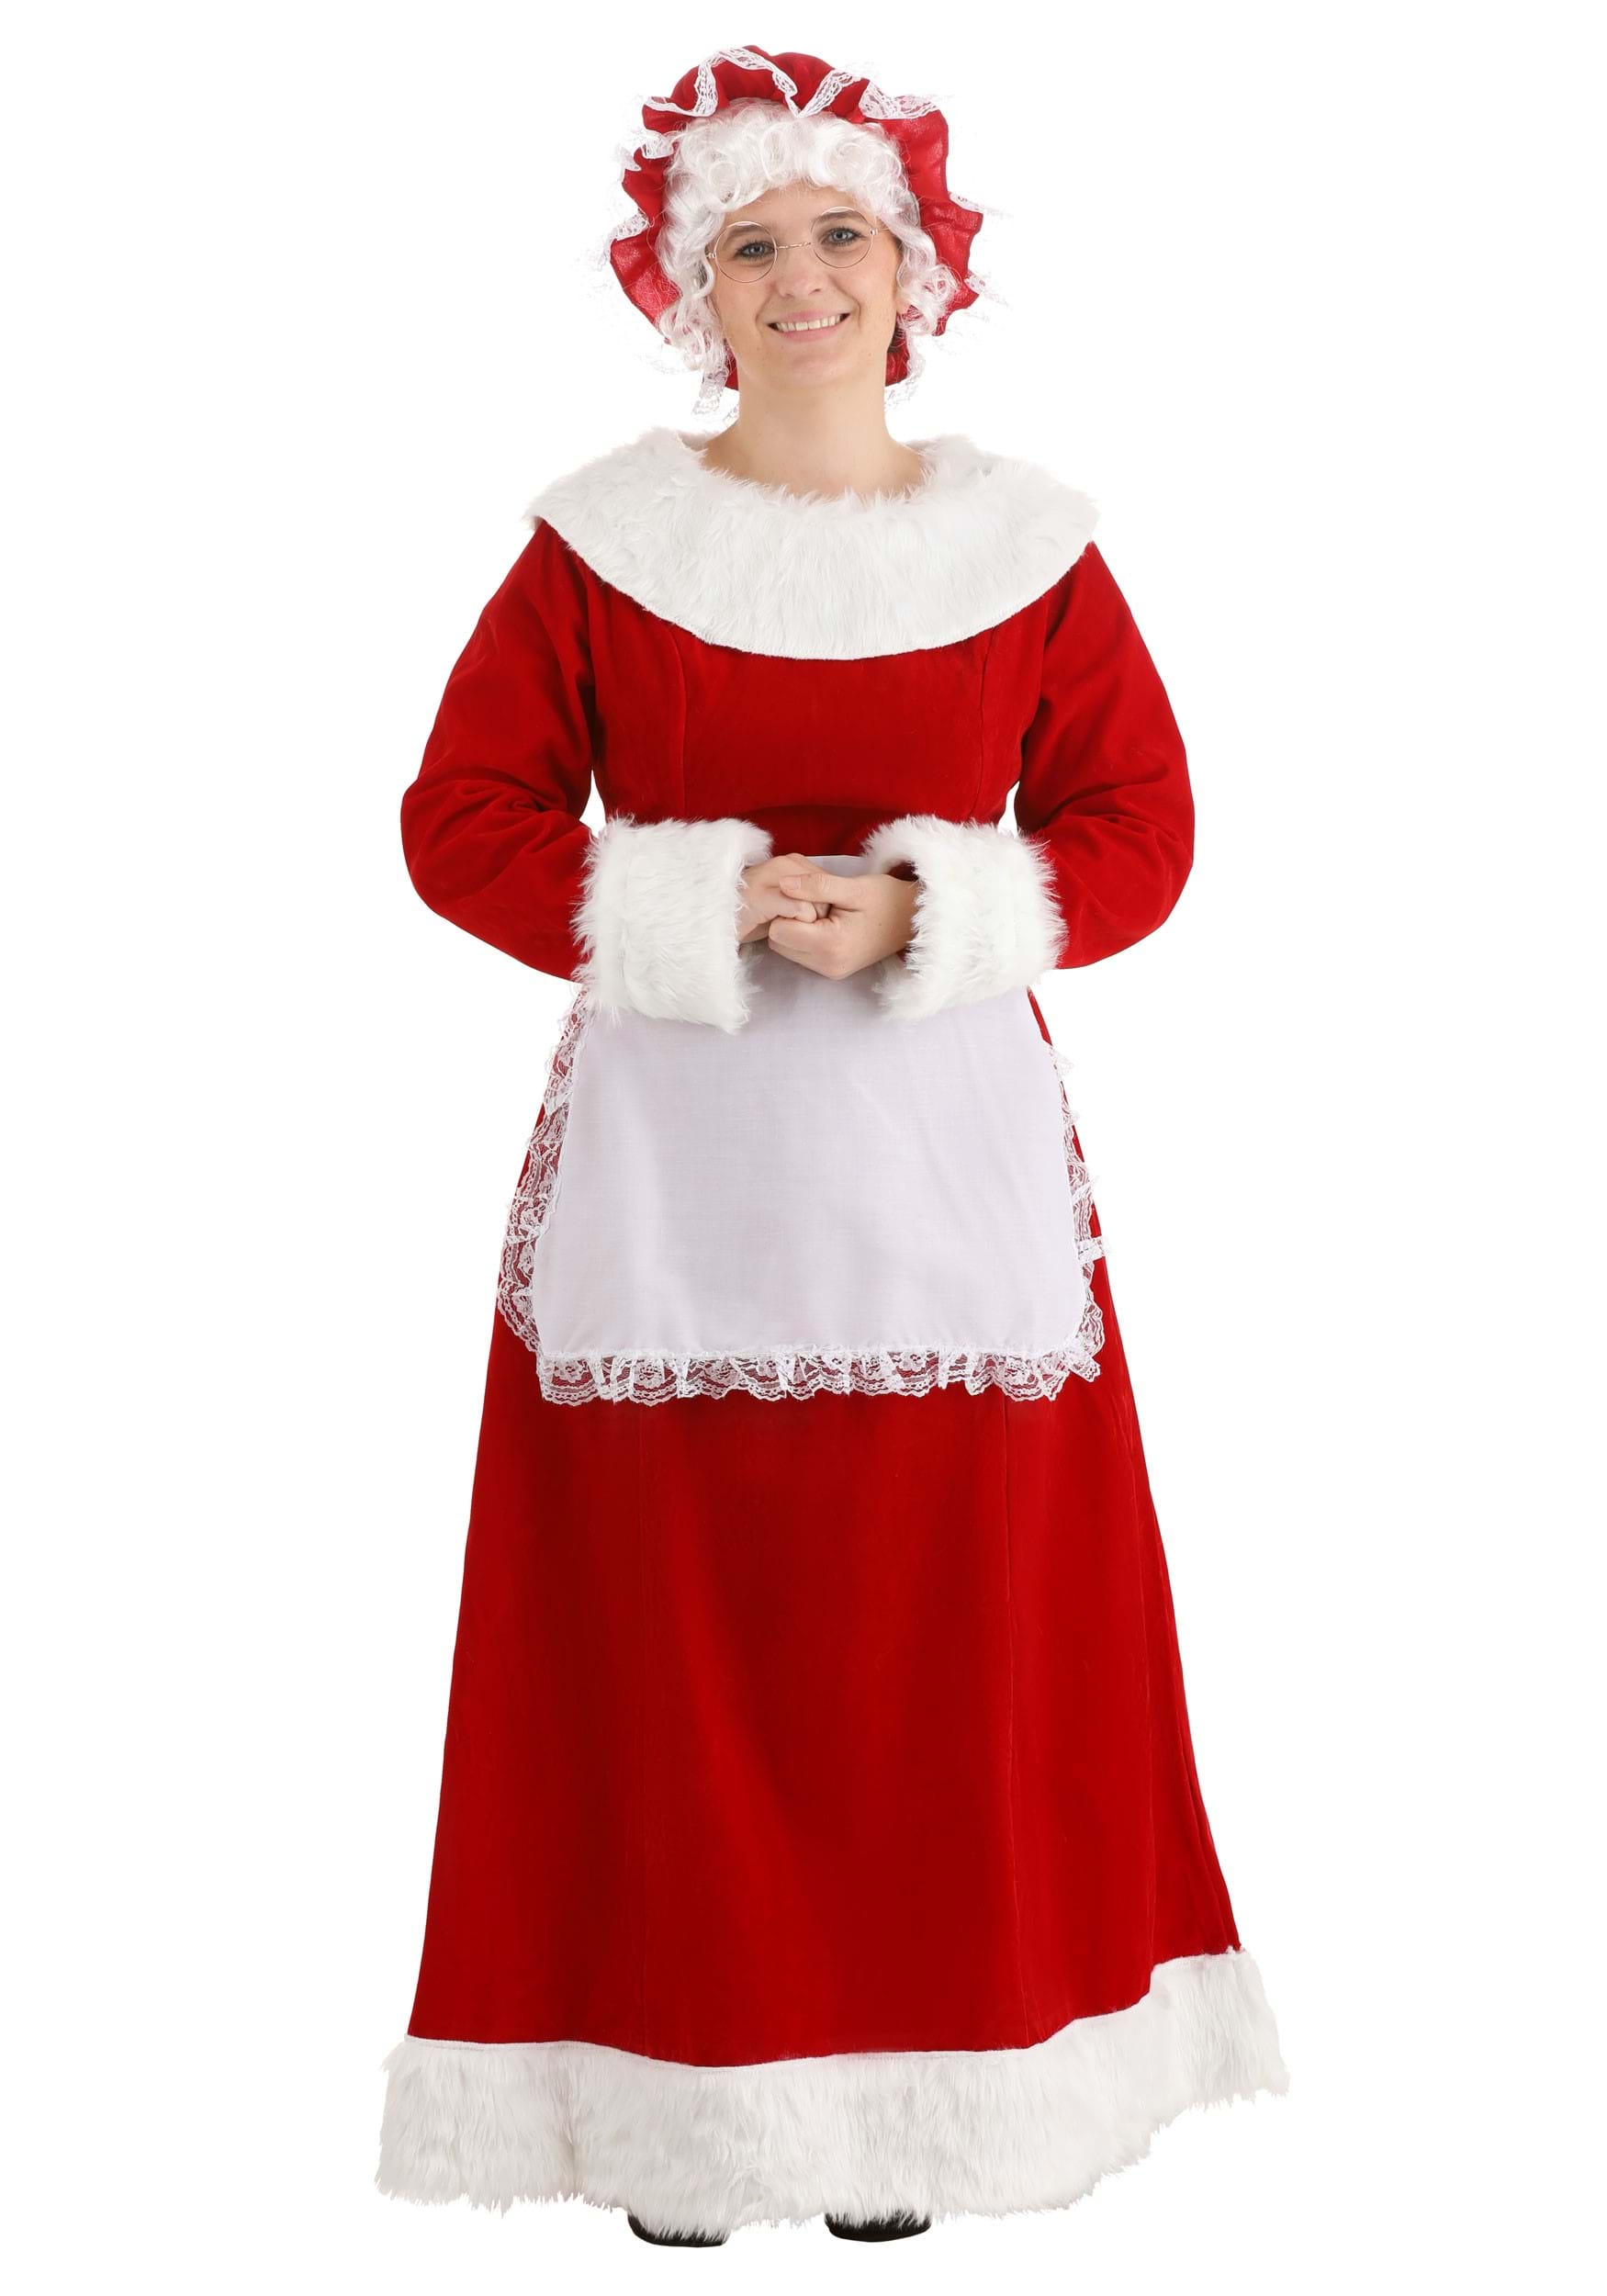 Details about   Women Christmas Deluxe Classic Mrs Santa Claus Cosplay Costume Suit Dress Newly 